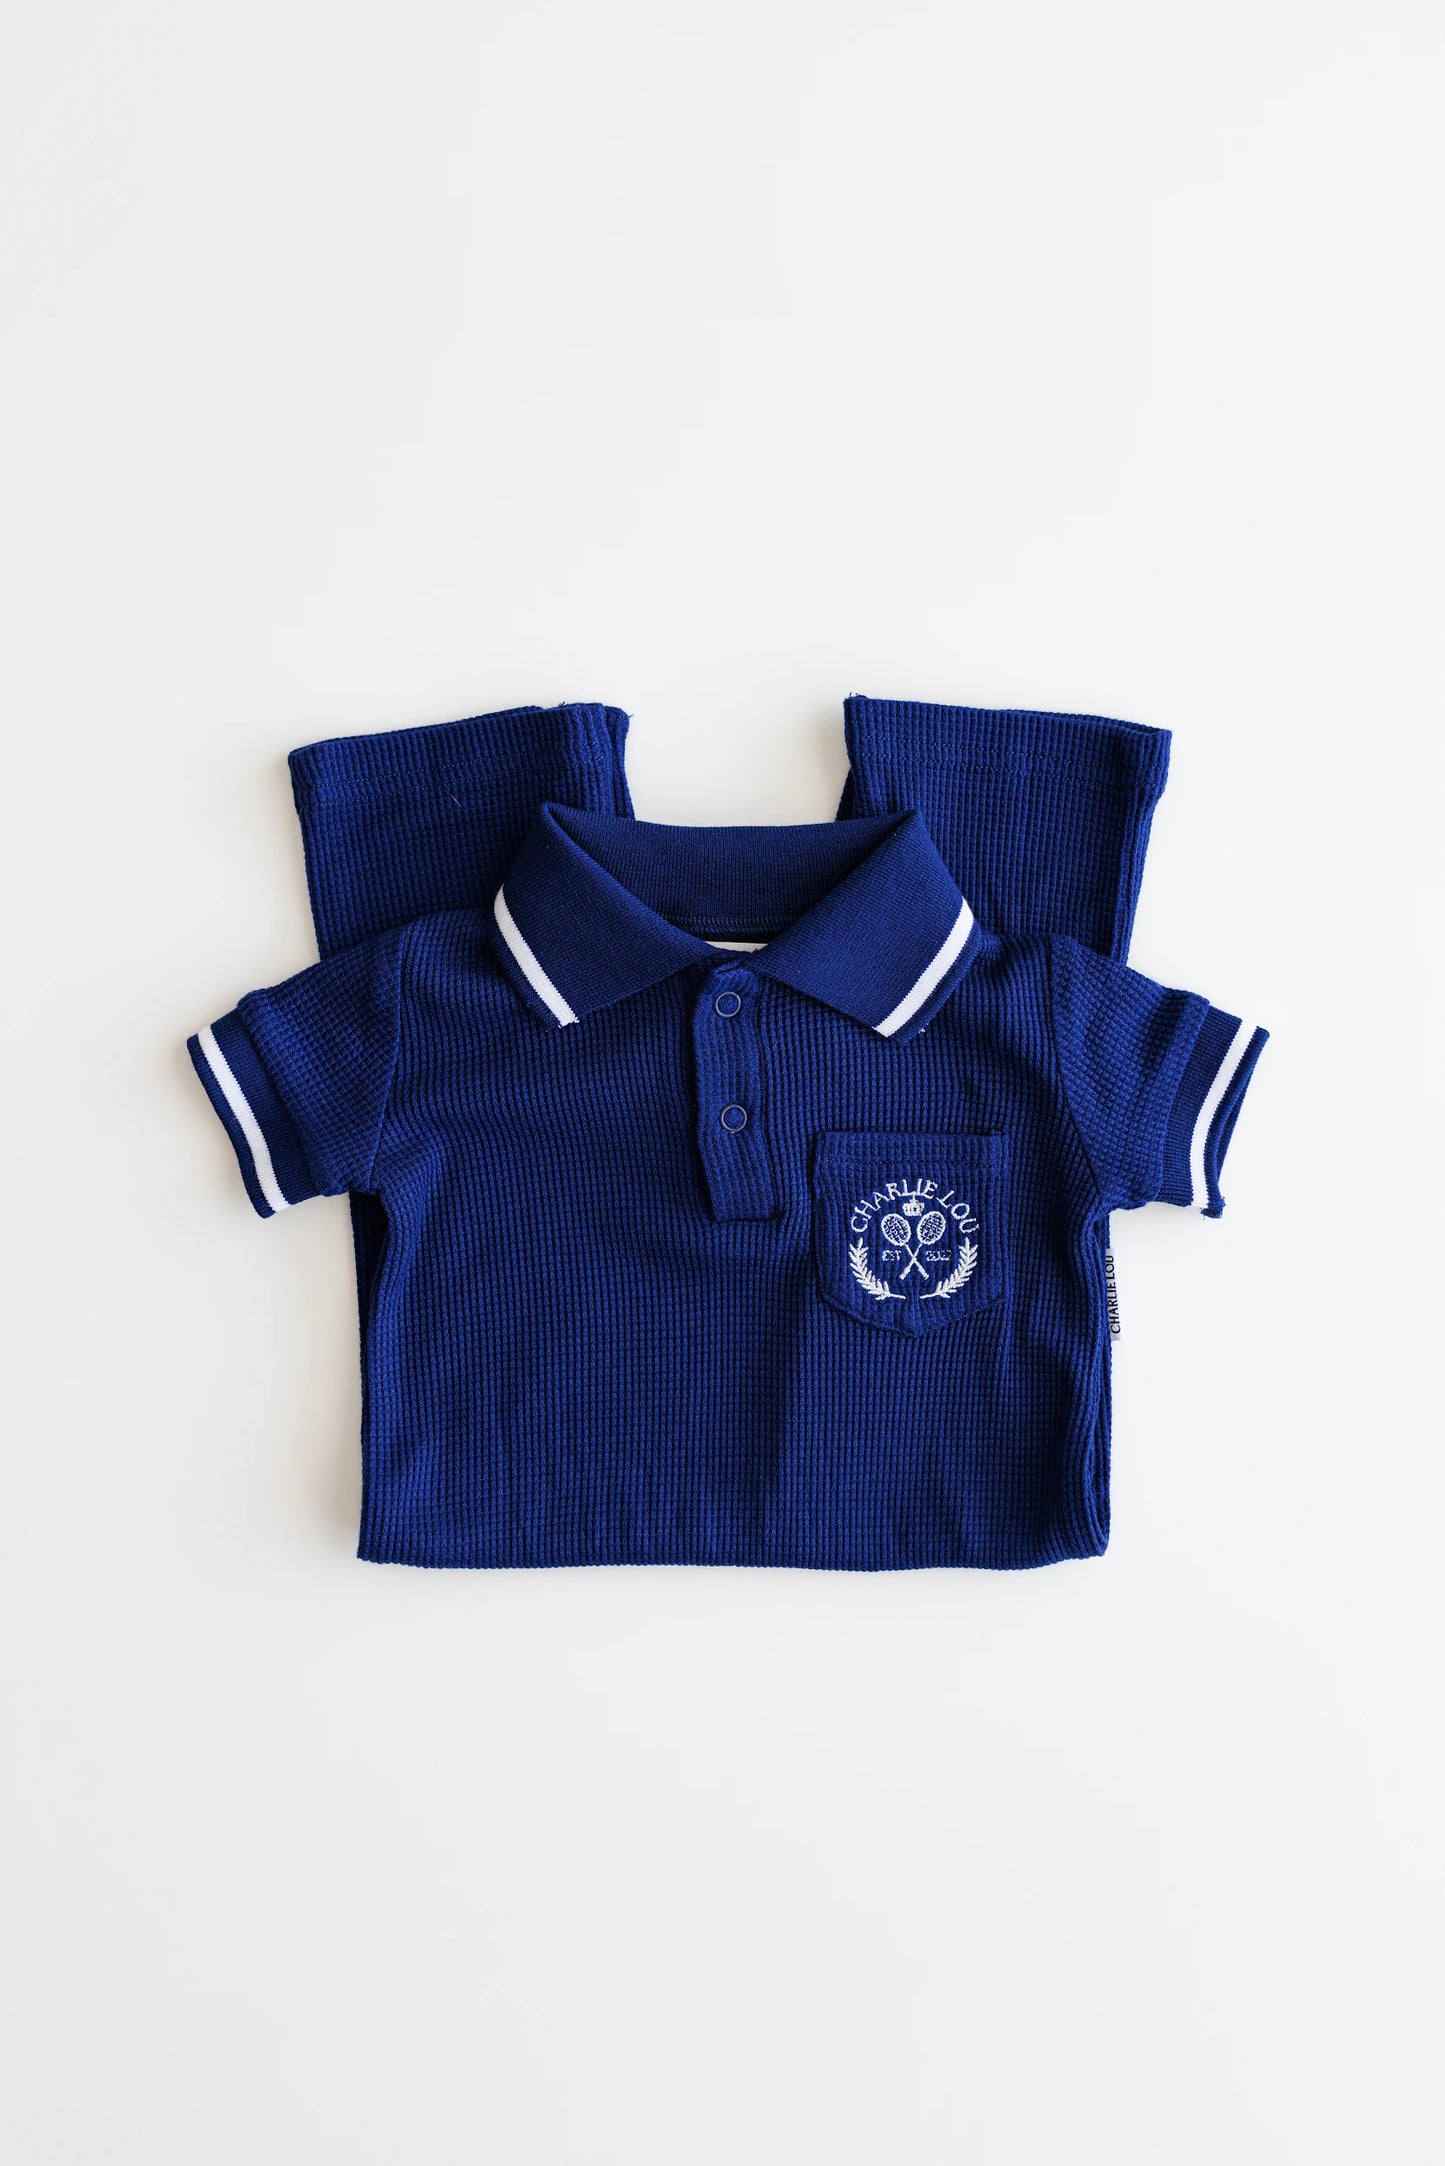 Preppy boys short sleeve polo romper with crotch snaps made from blue waffle bamboo & embroidered with Charlie Lou Baby Club.